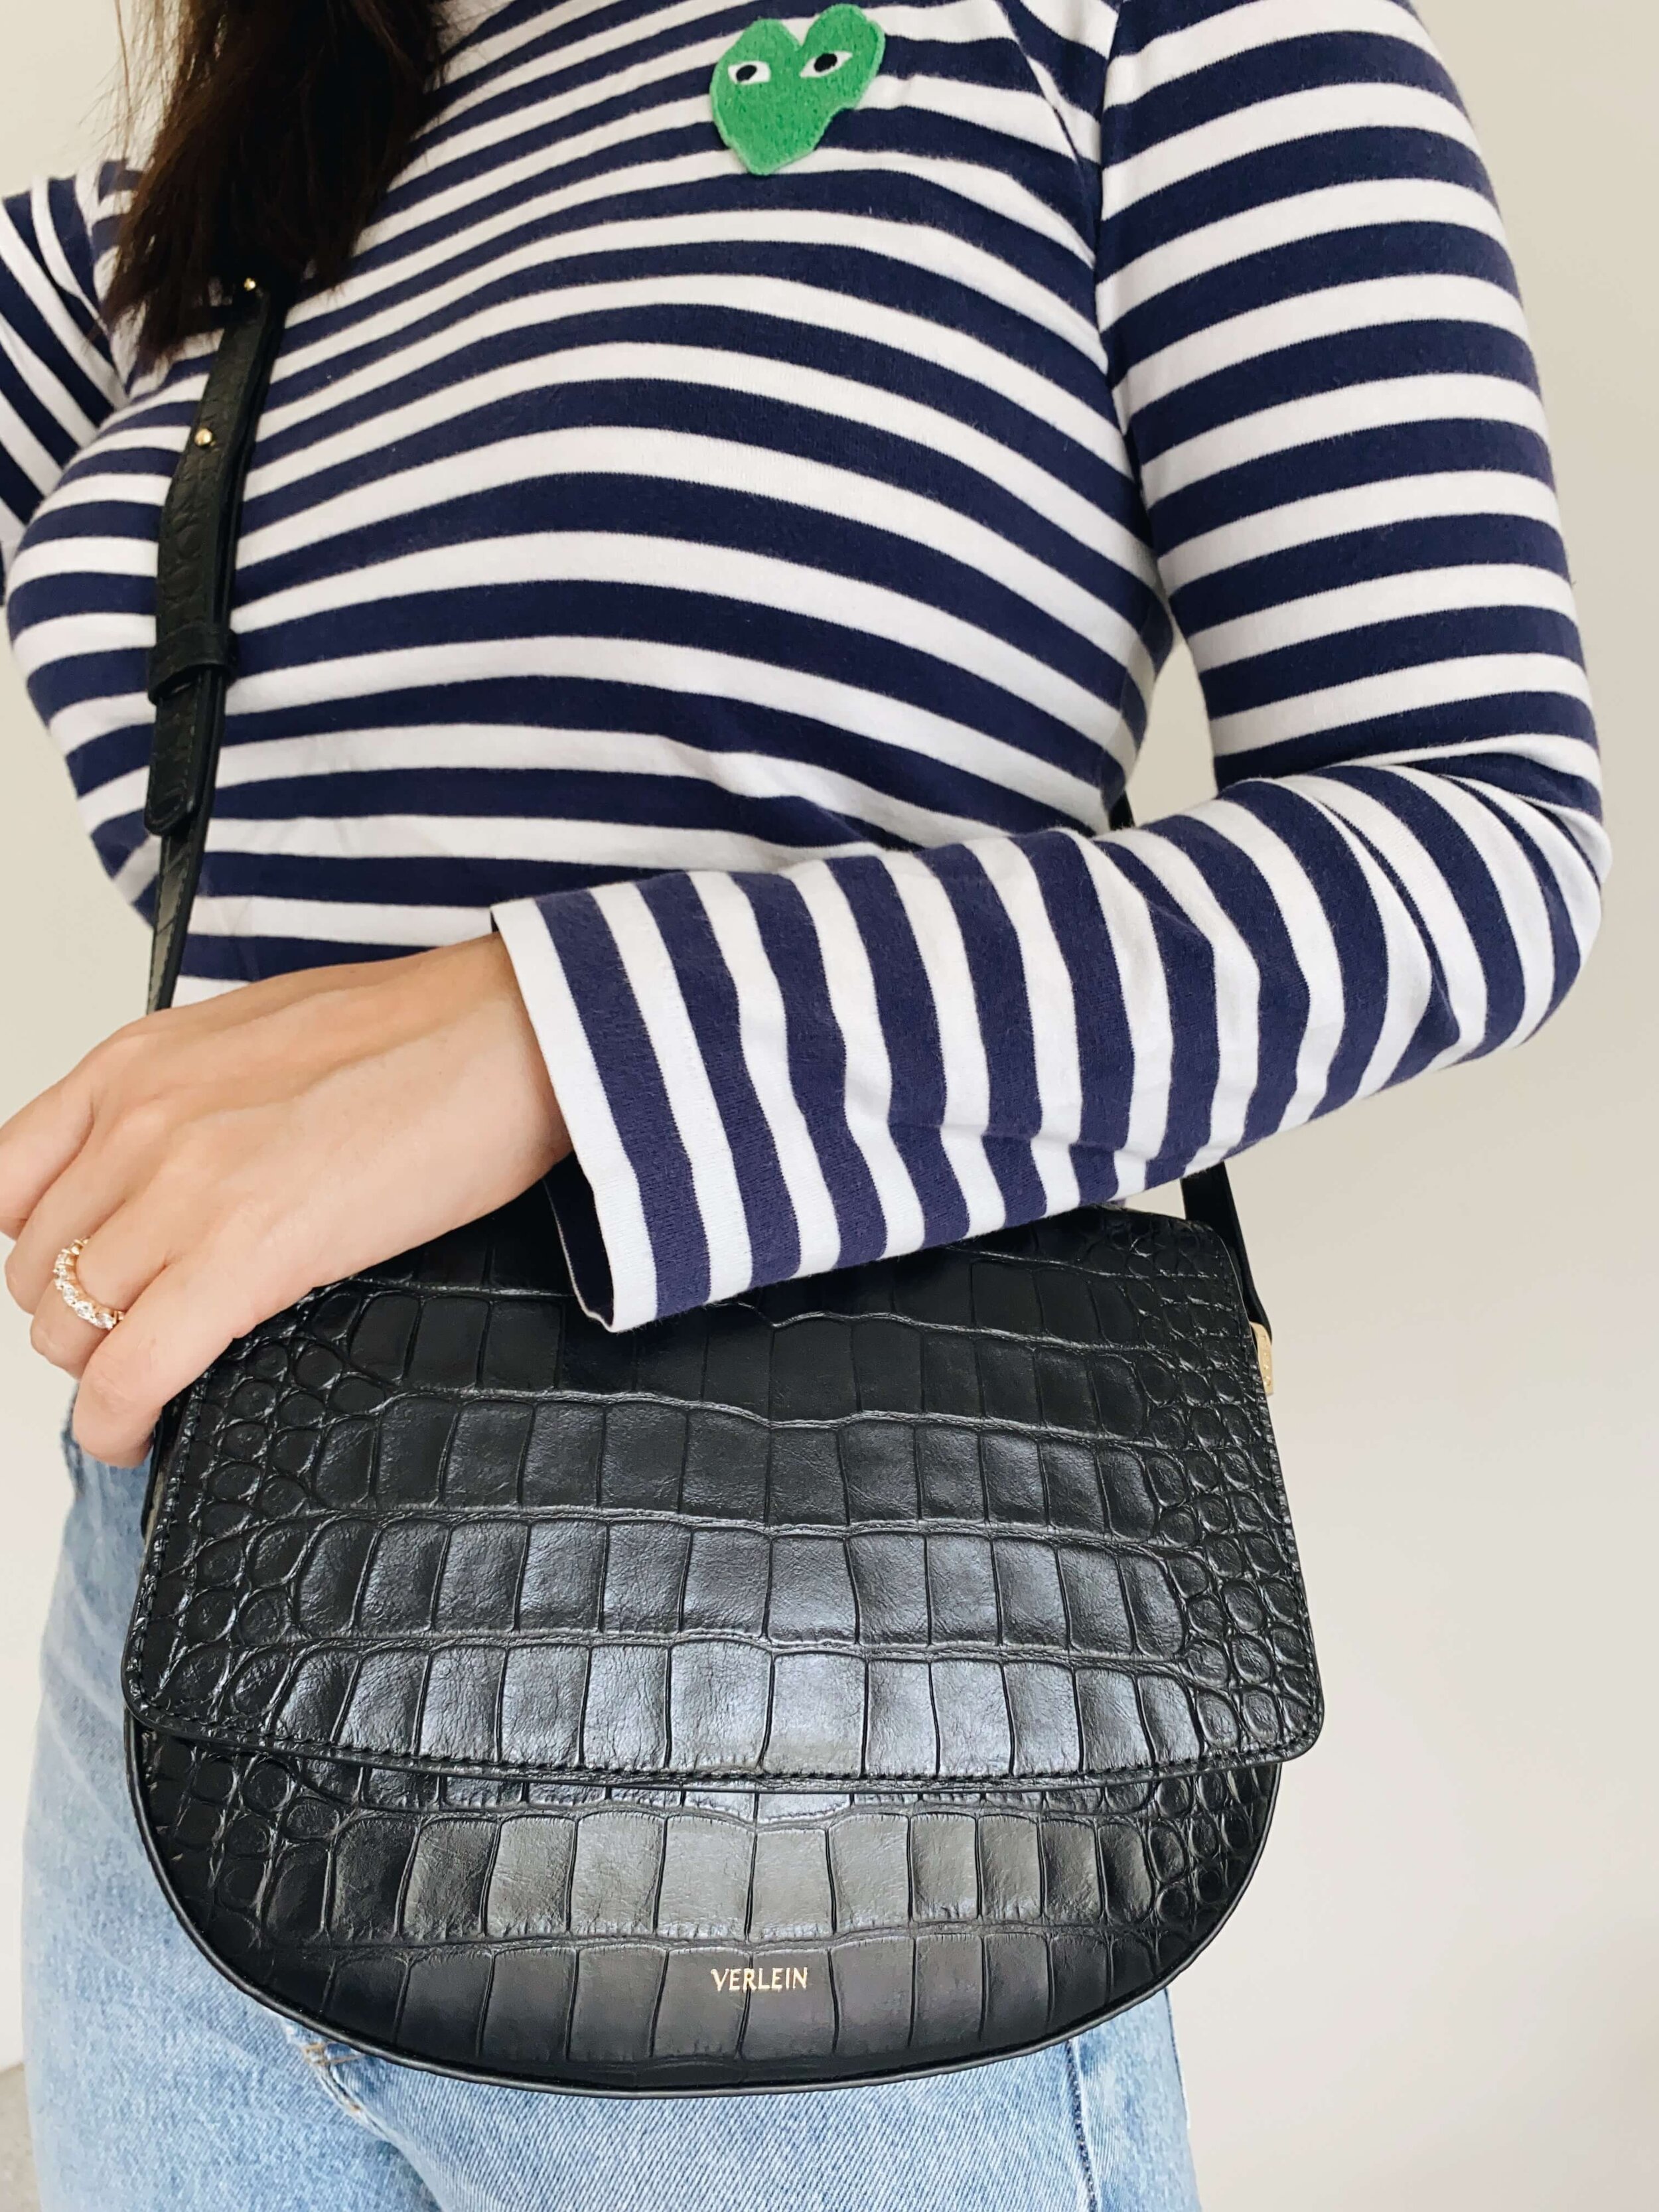 Verlein Ana Crossbody Review {Updated February 2022} — Fairly Curated